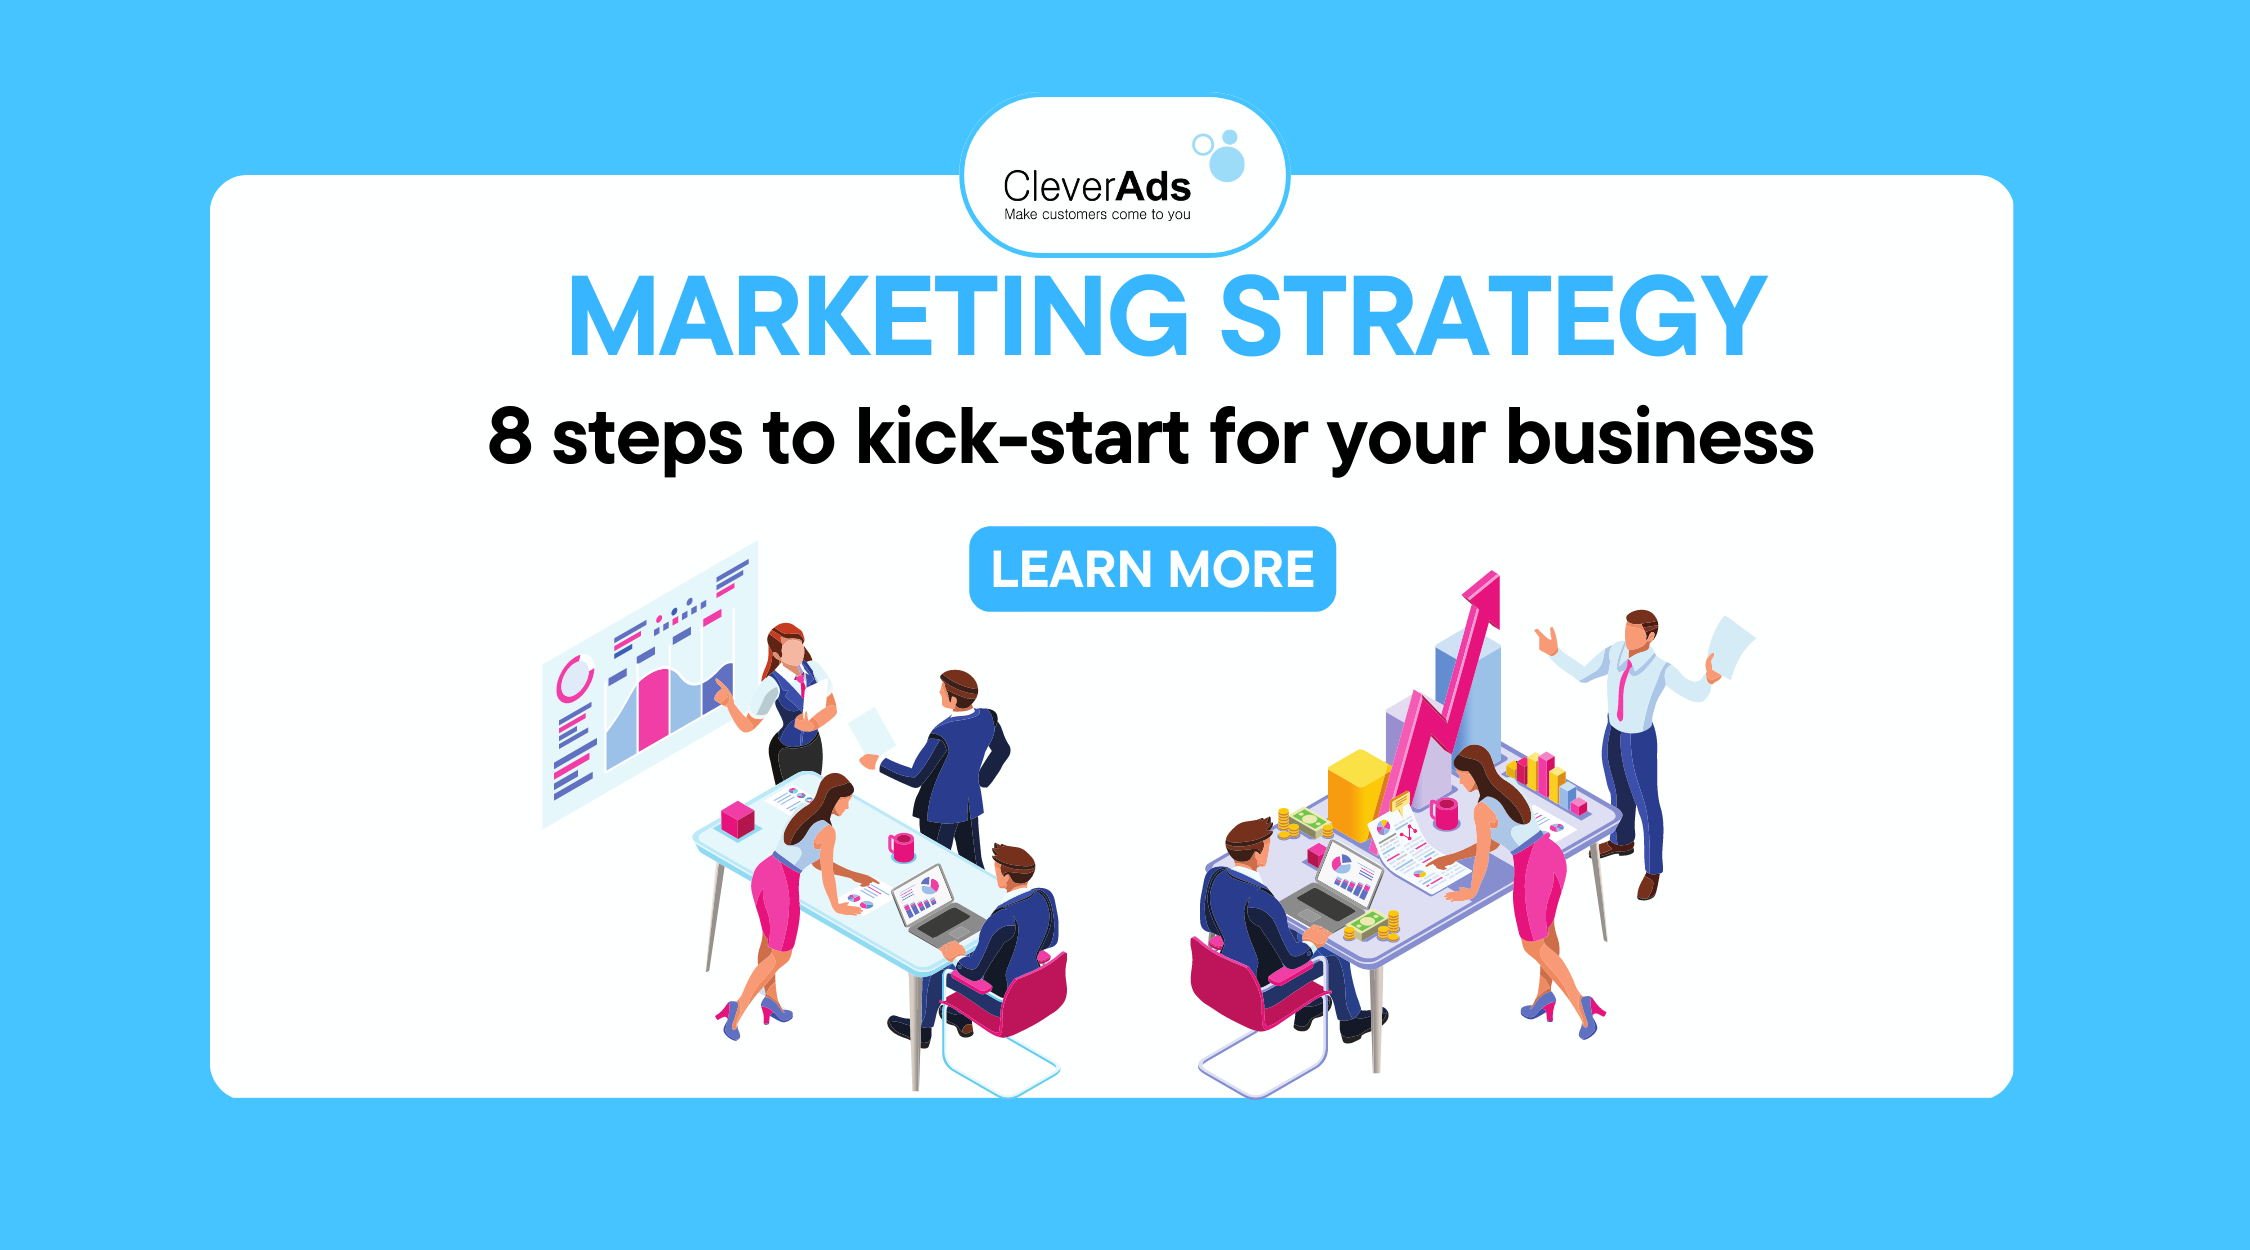 Marketing Strategy: 8 steps to kick-start your business